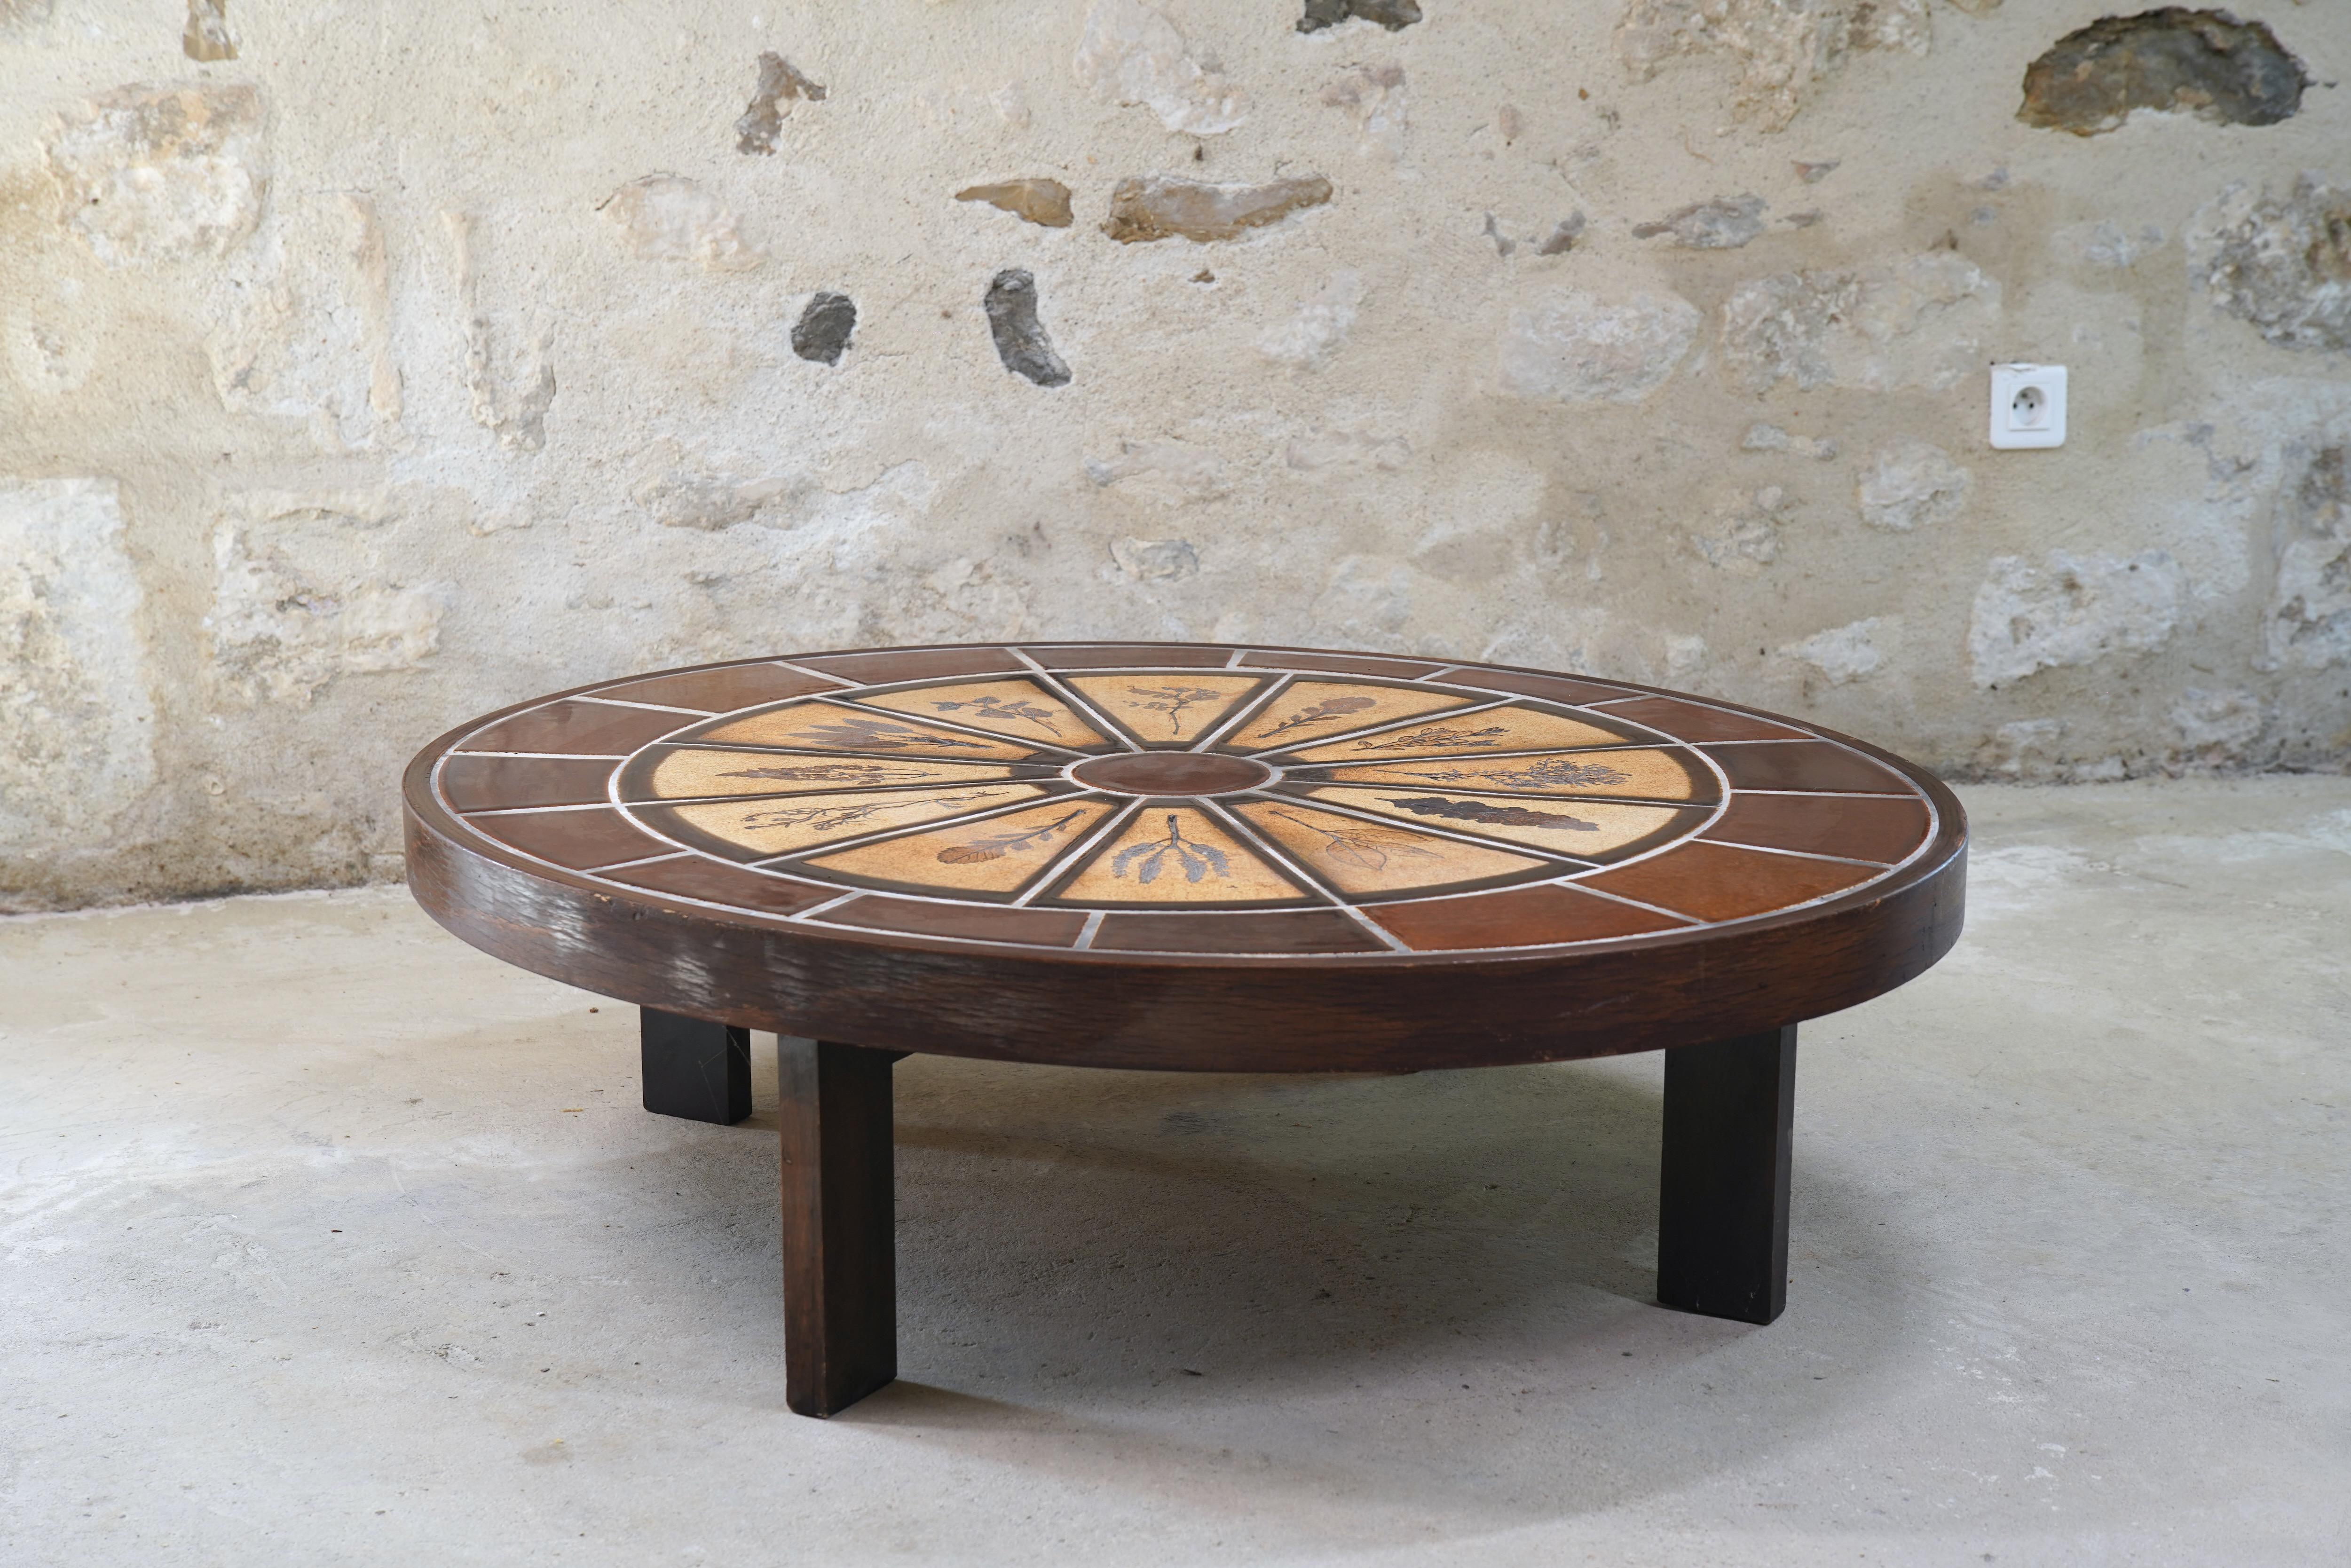 Glazed Roger Capron Oval Coffee Table with Garrigue Tiles, France 1960s For Sale